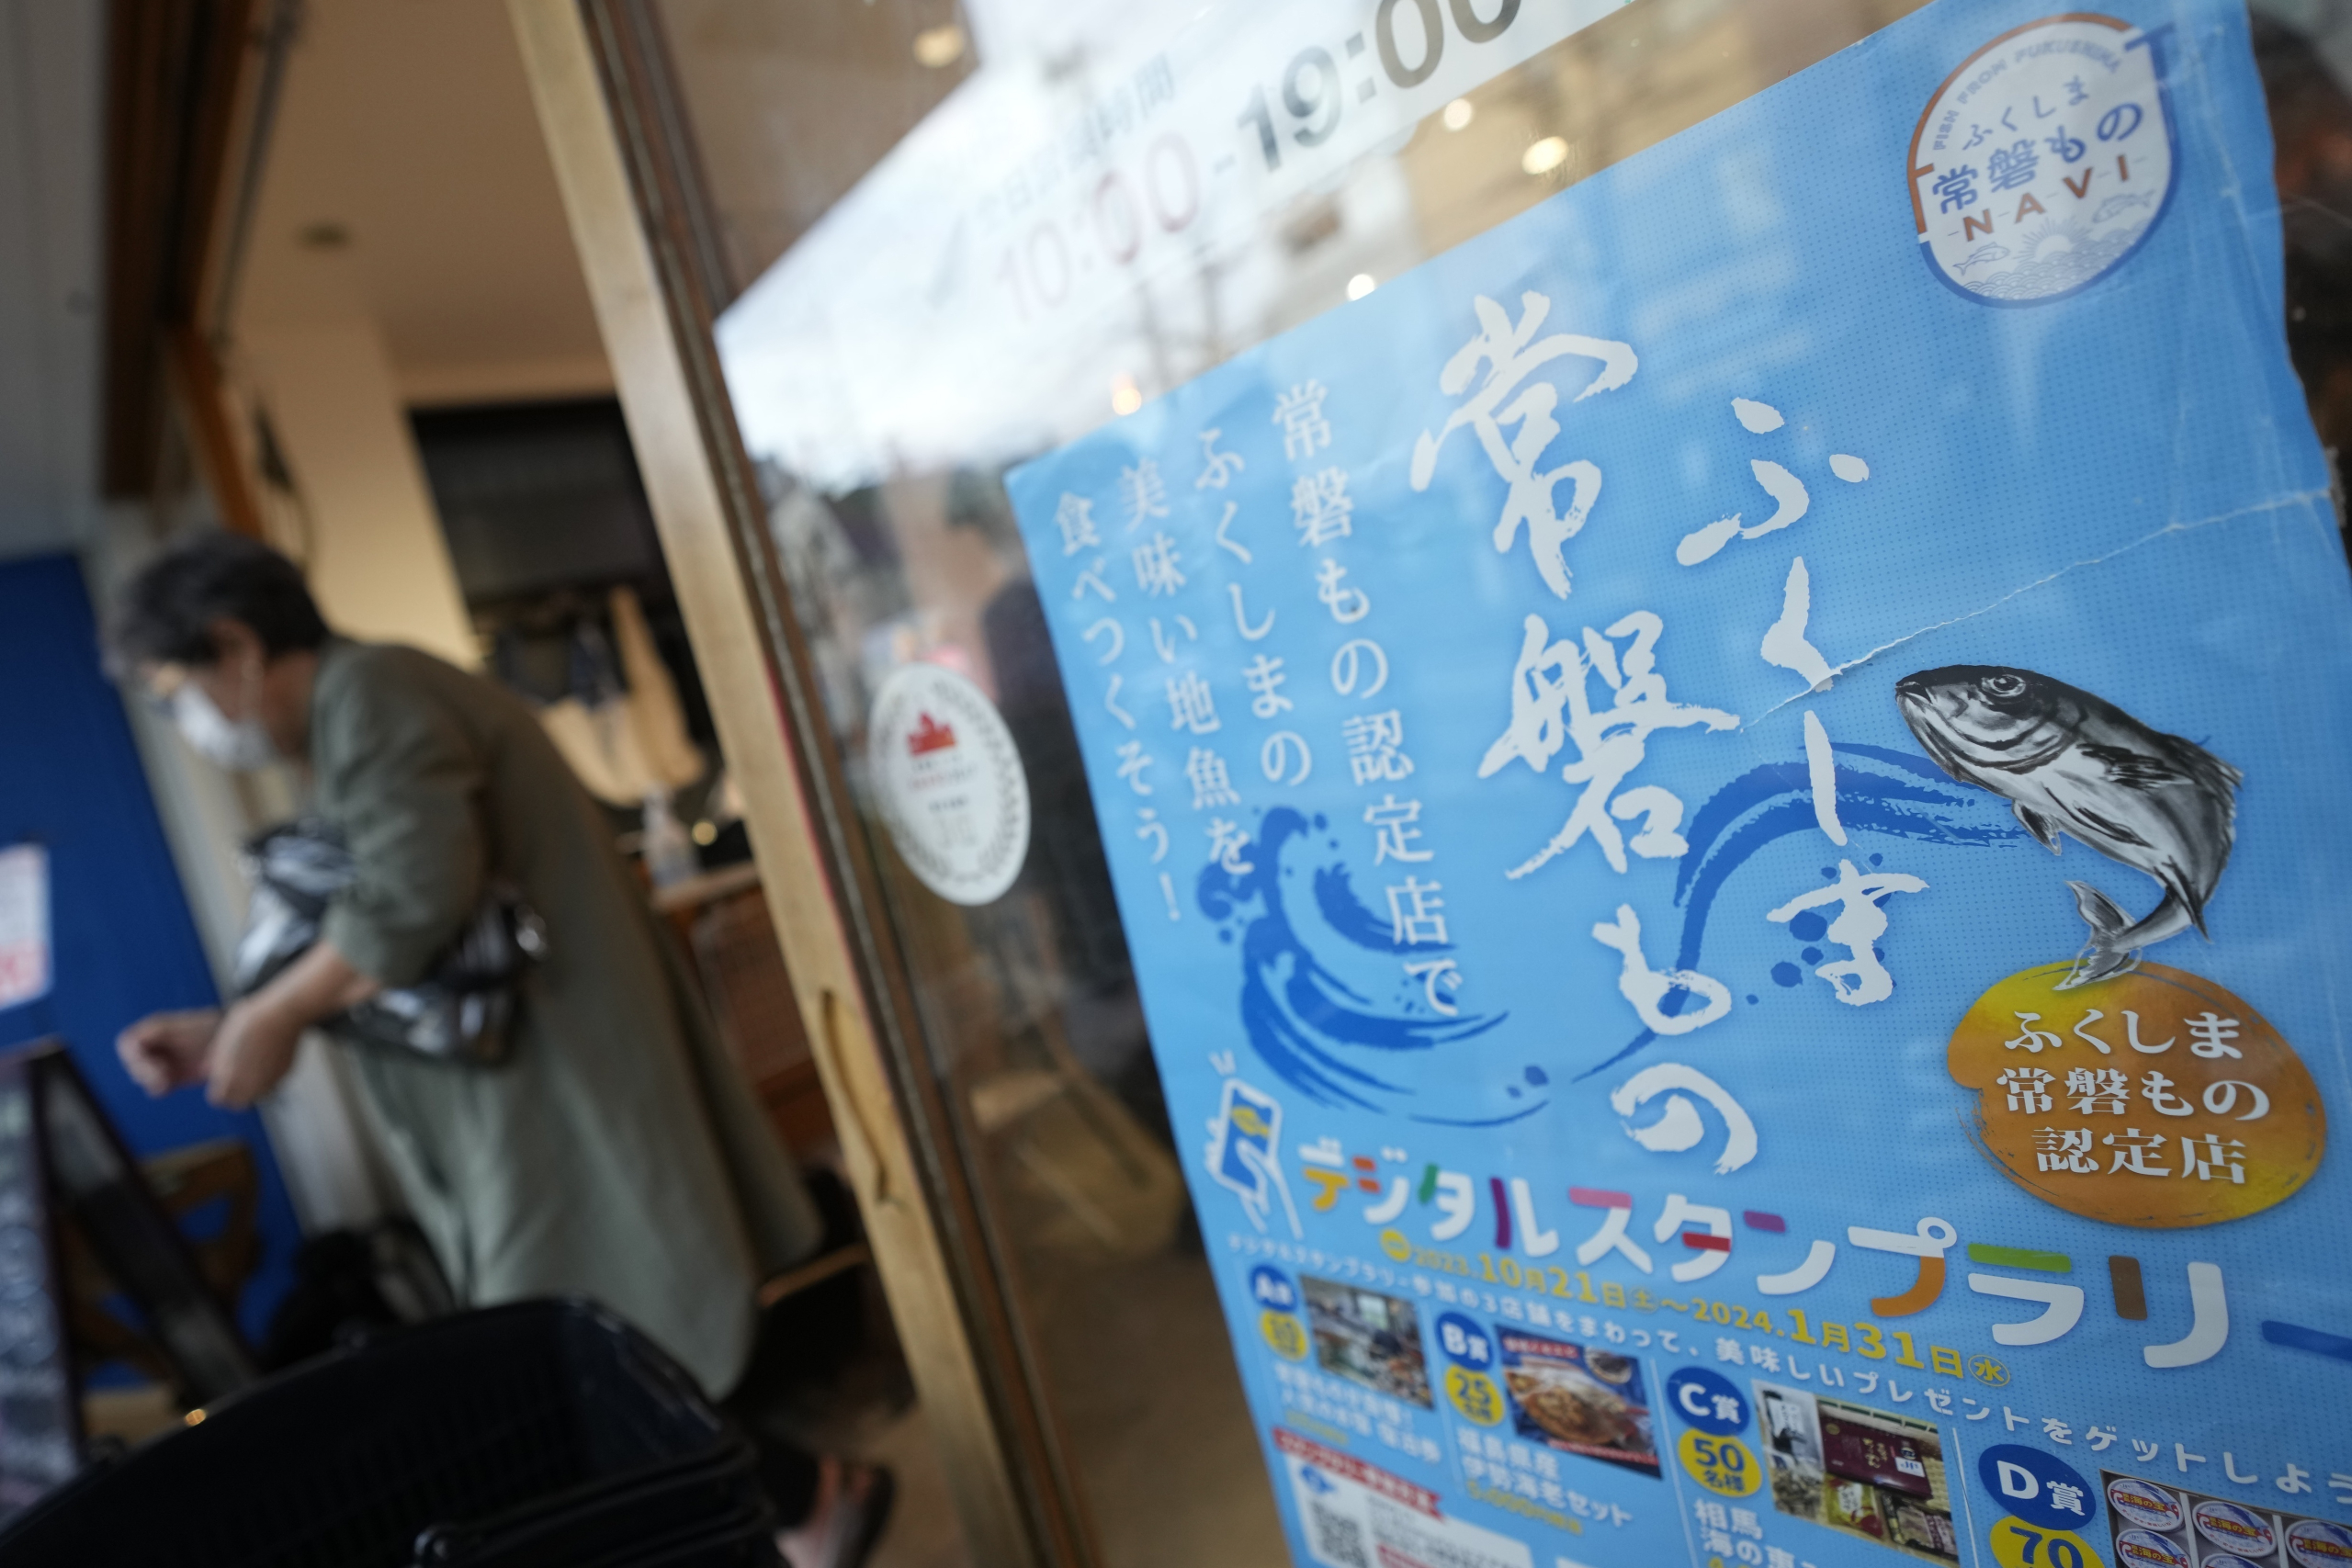 A poster to promote Fukushima seafood is placed on the front door at Sakana Bacca, a seafood retailer, on Oct. 31, 2023, in Tokyo. Fishing communities in Fukushima feared devastating damage to their businesses from the tsunami-wrecked nuclear power plant’s ongoing discharge of treated radioactive wastewater into the sea. Instead, they're seeing increased consumer support as people eat more fish, a movement in part helped by China’s ban on Japanese seafood. (AP Photo/Eugene Hoshiko)

Associated Press/LaPresse
Only Italy and Spain